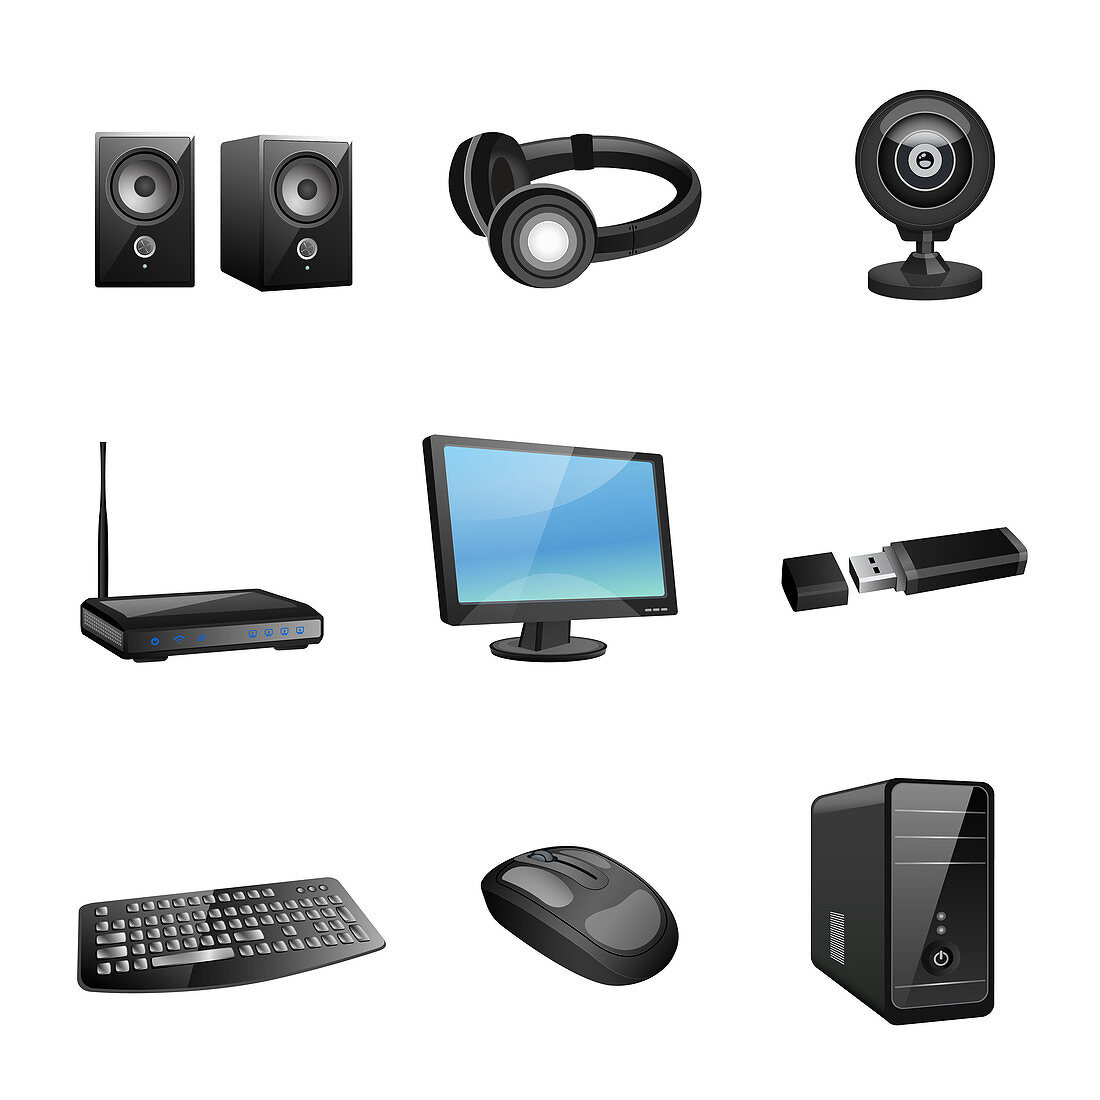 Computer and accessories, illustration